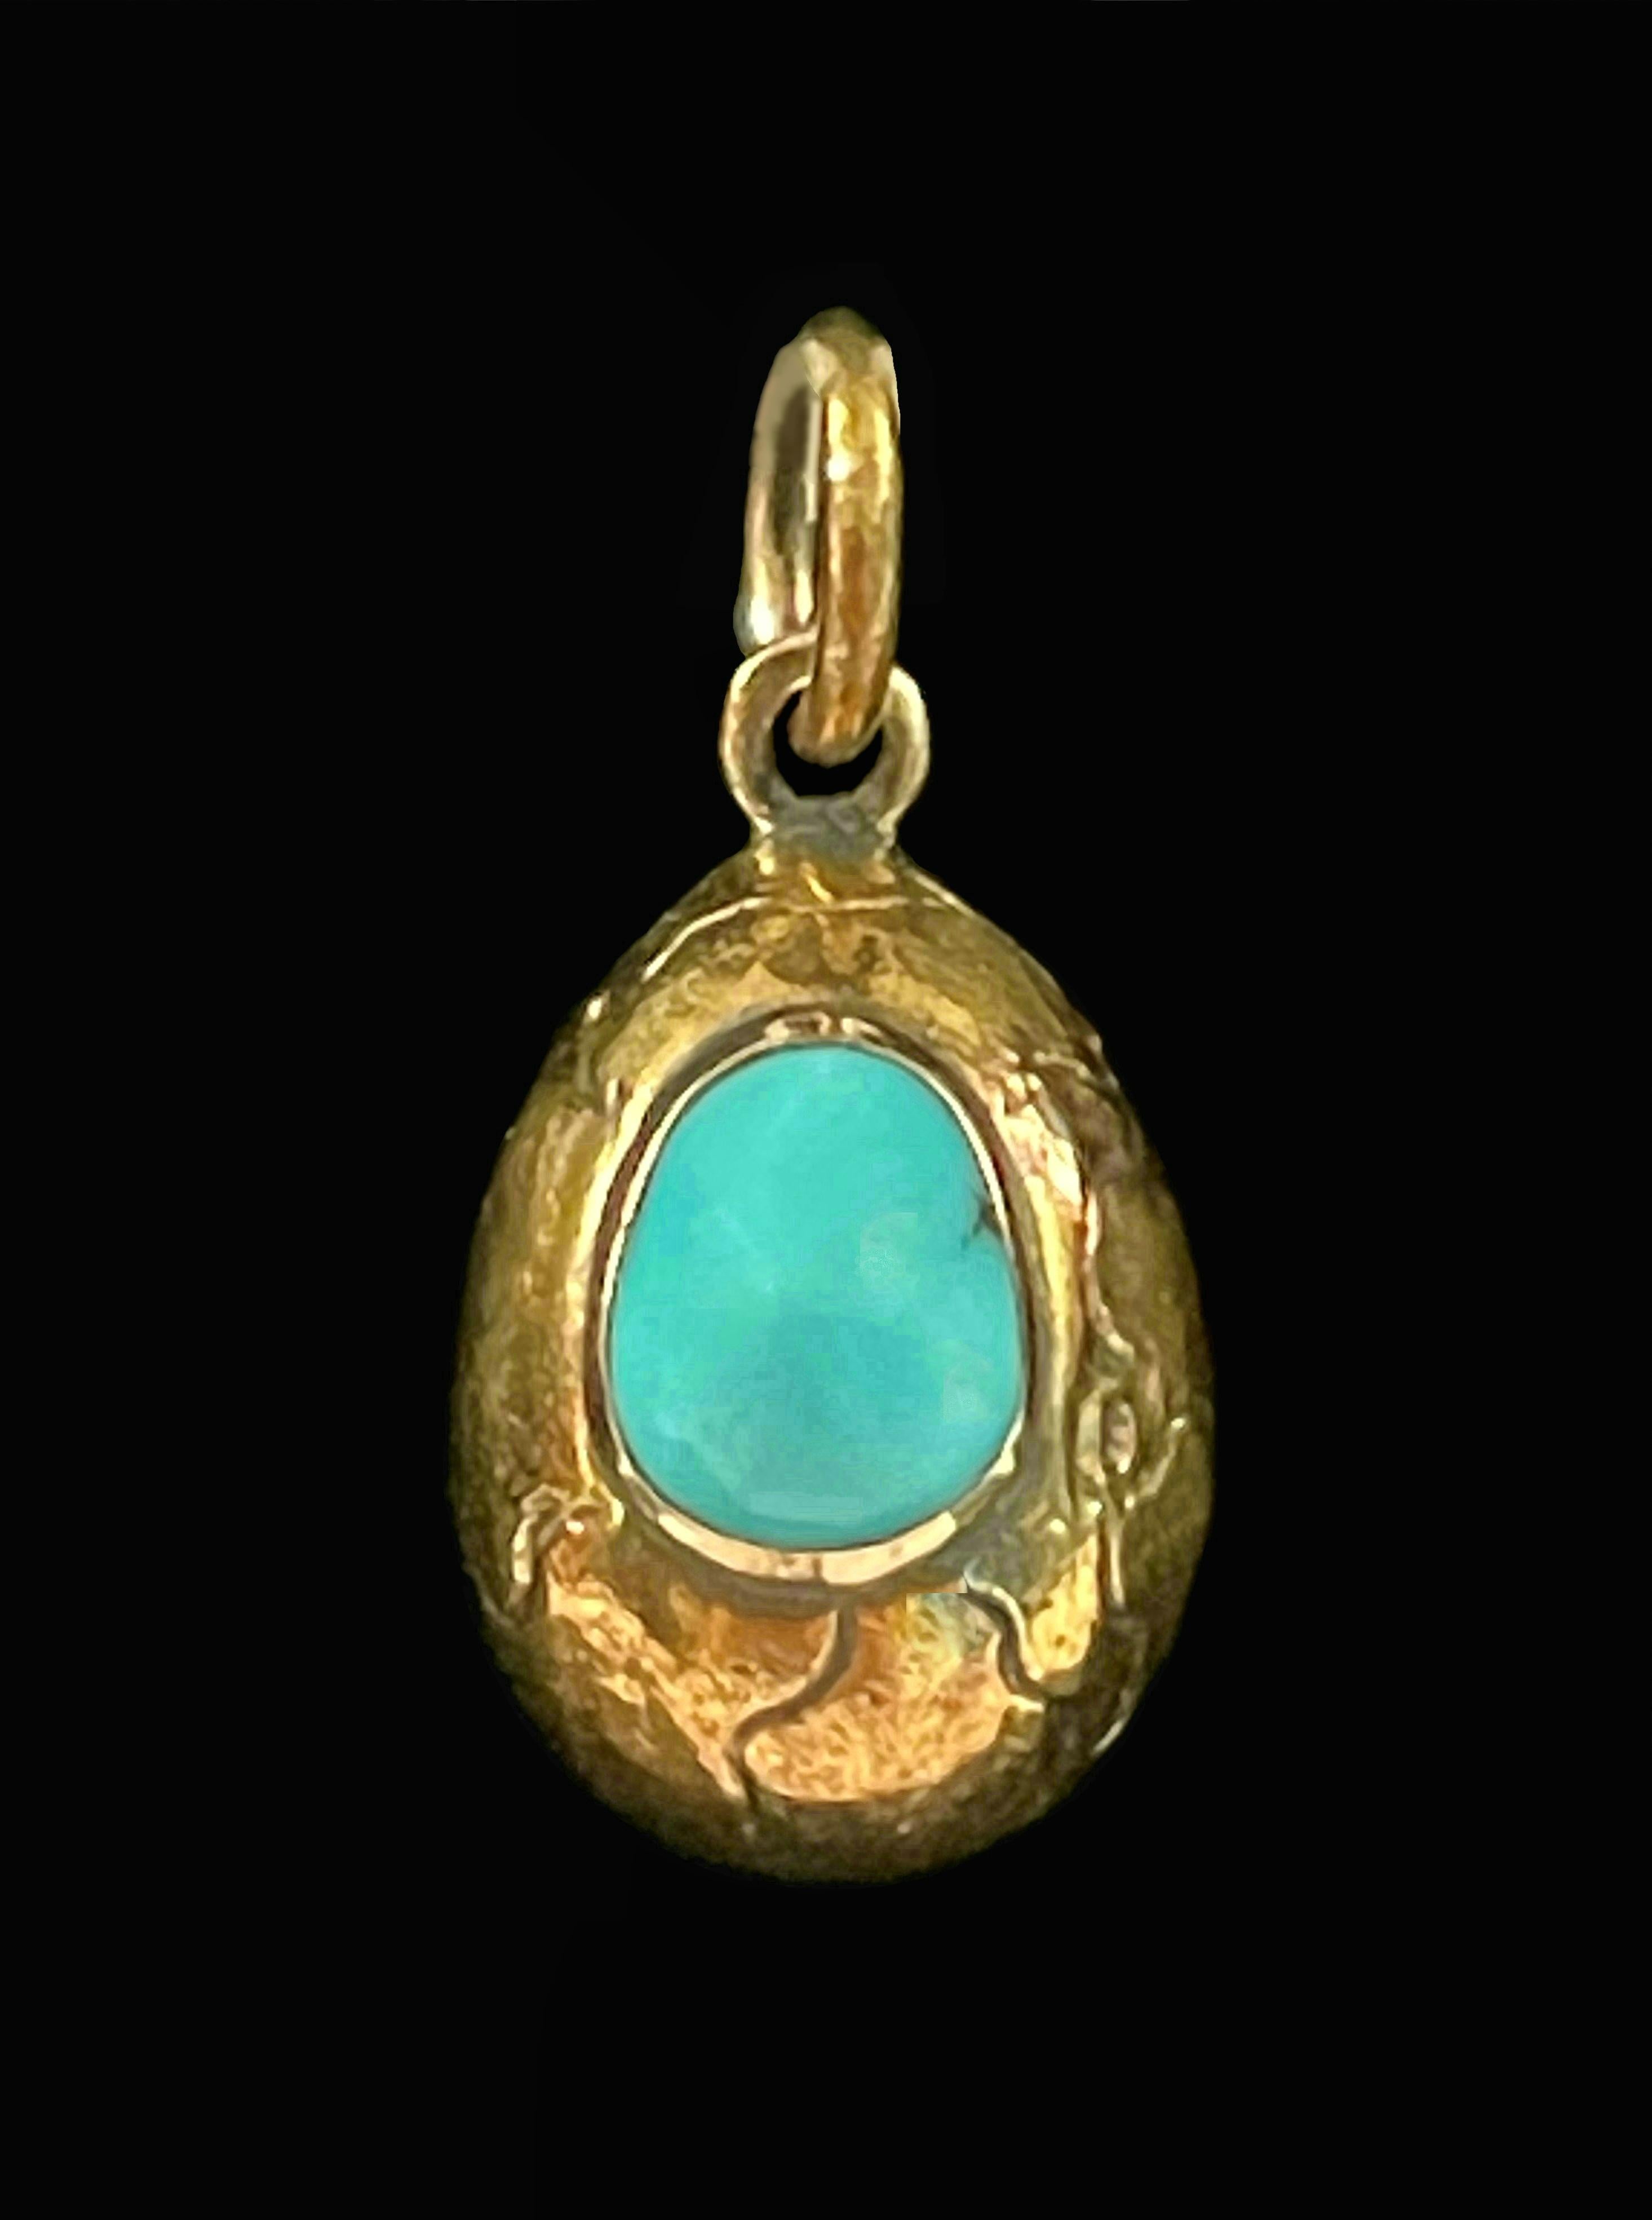 Fine antique 14K yellow gold and Persian Turquoise Easter egg charm or pendant - featuring a bezel set cabochon cut Persian Turquoise (approx. 1.57 Total Carat Weight - 6.5 mm. Wide x 8 mm. Long x 4 mm. Deep) - the gold body of the egg delicately